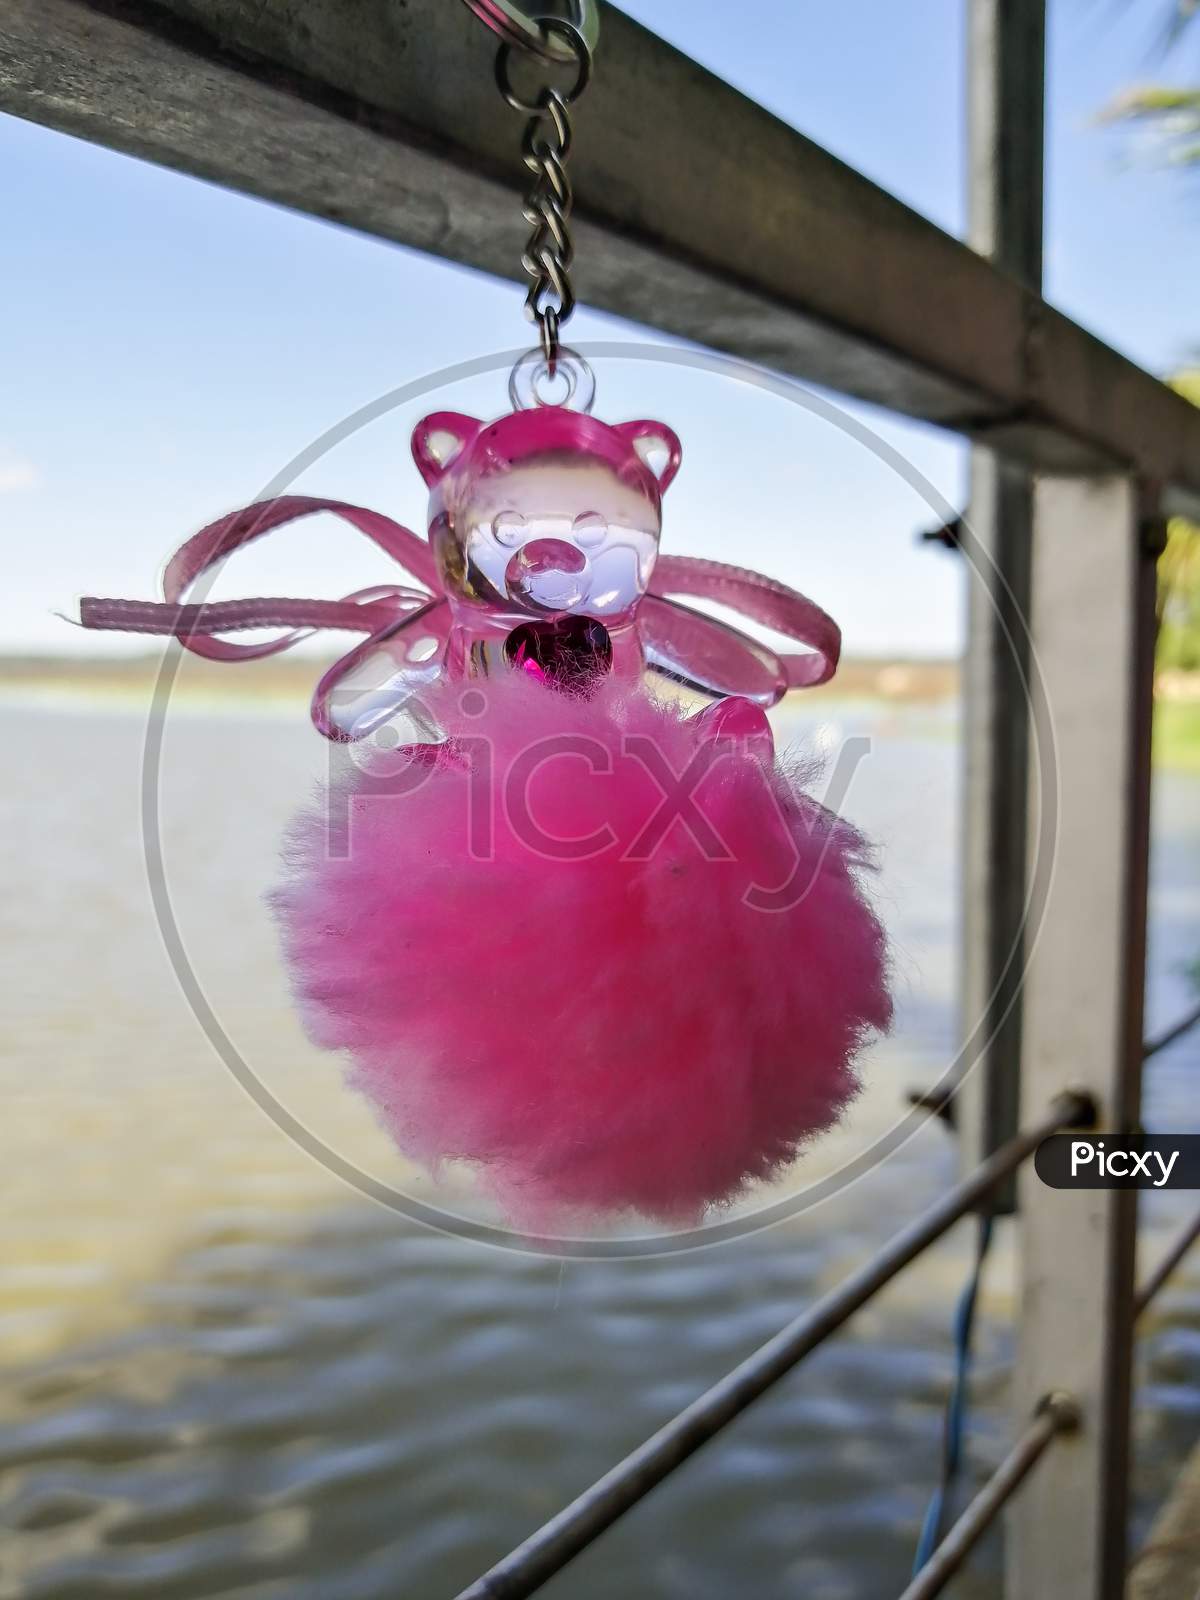 Small Teddy Bear Key Tag Hang On The Square Steel Bar.